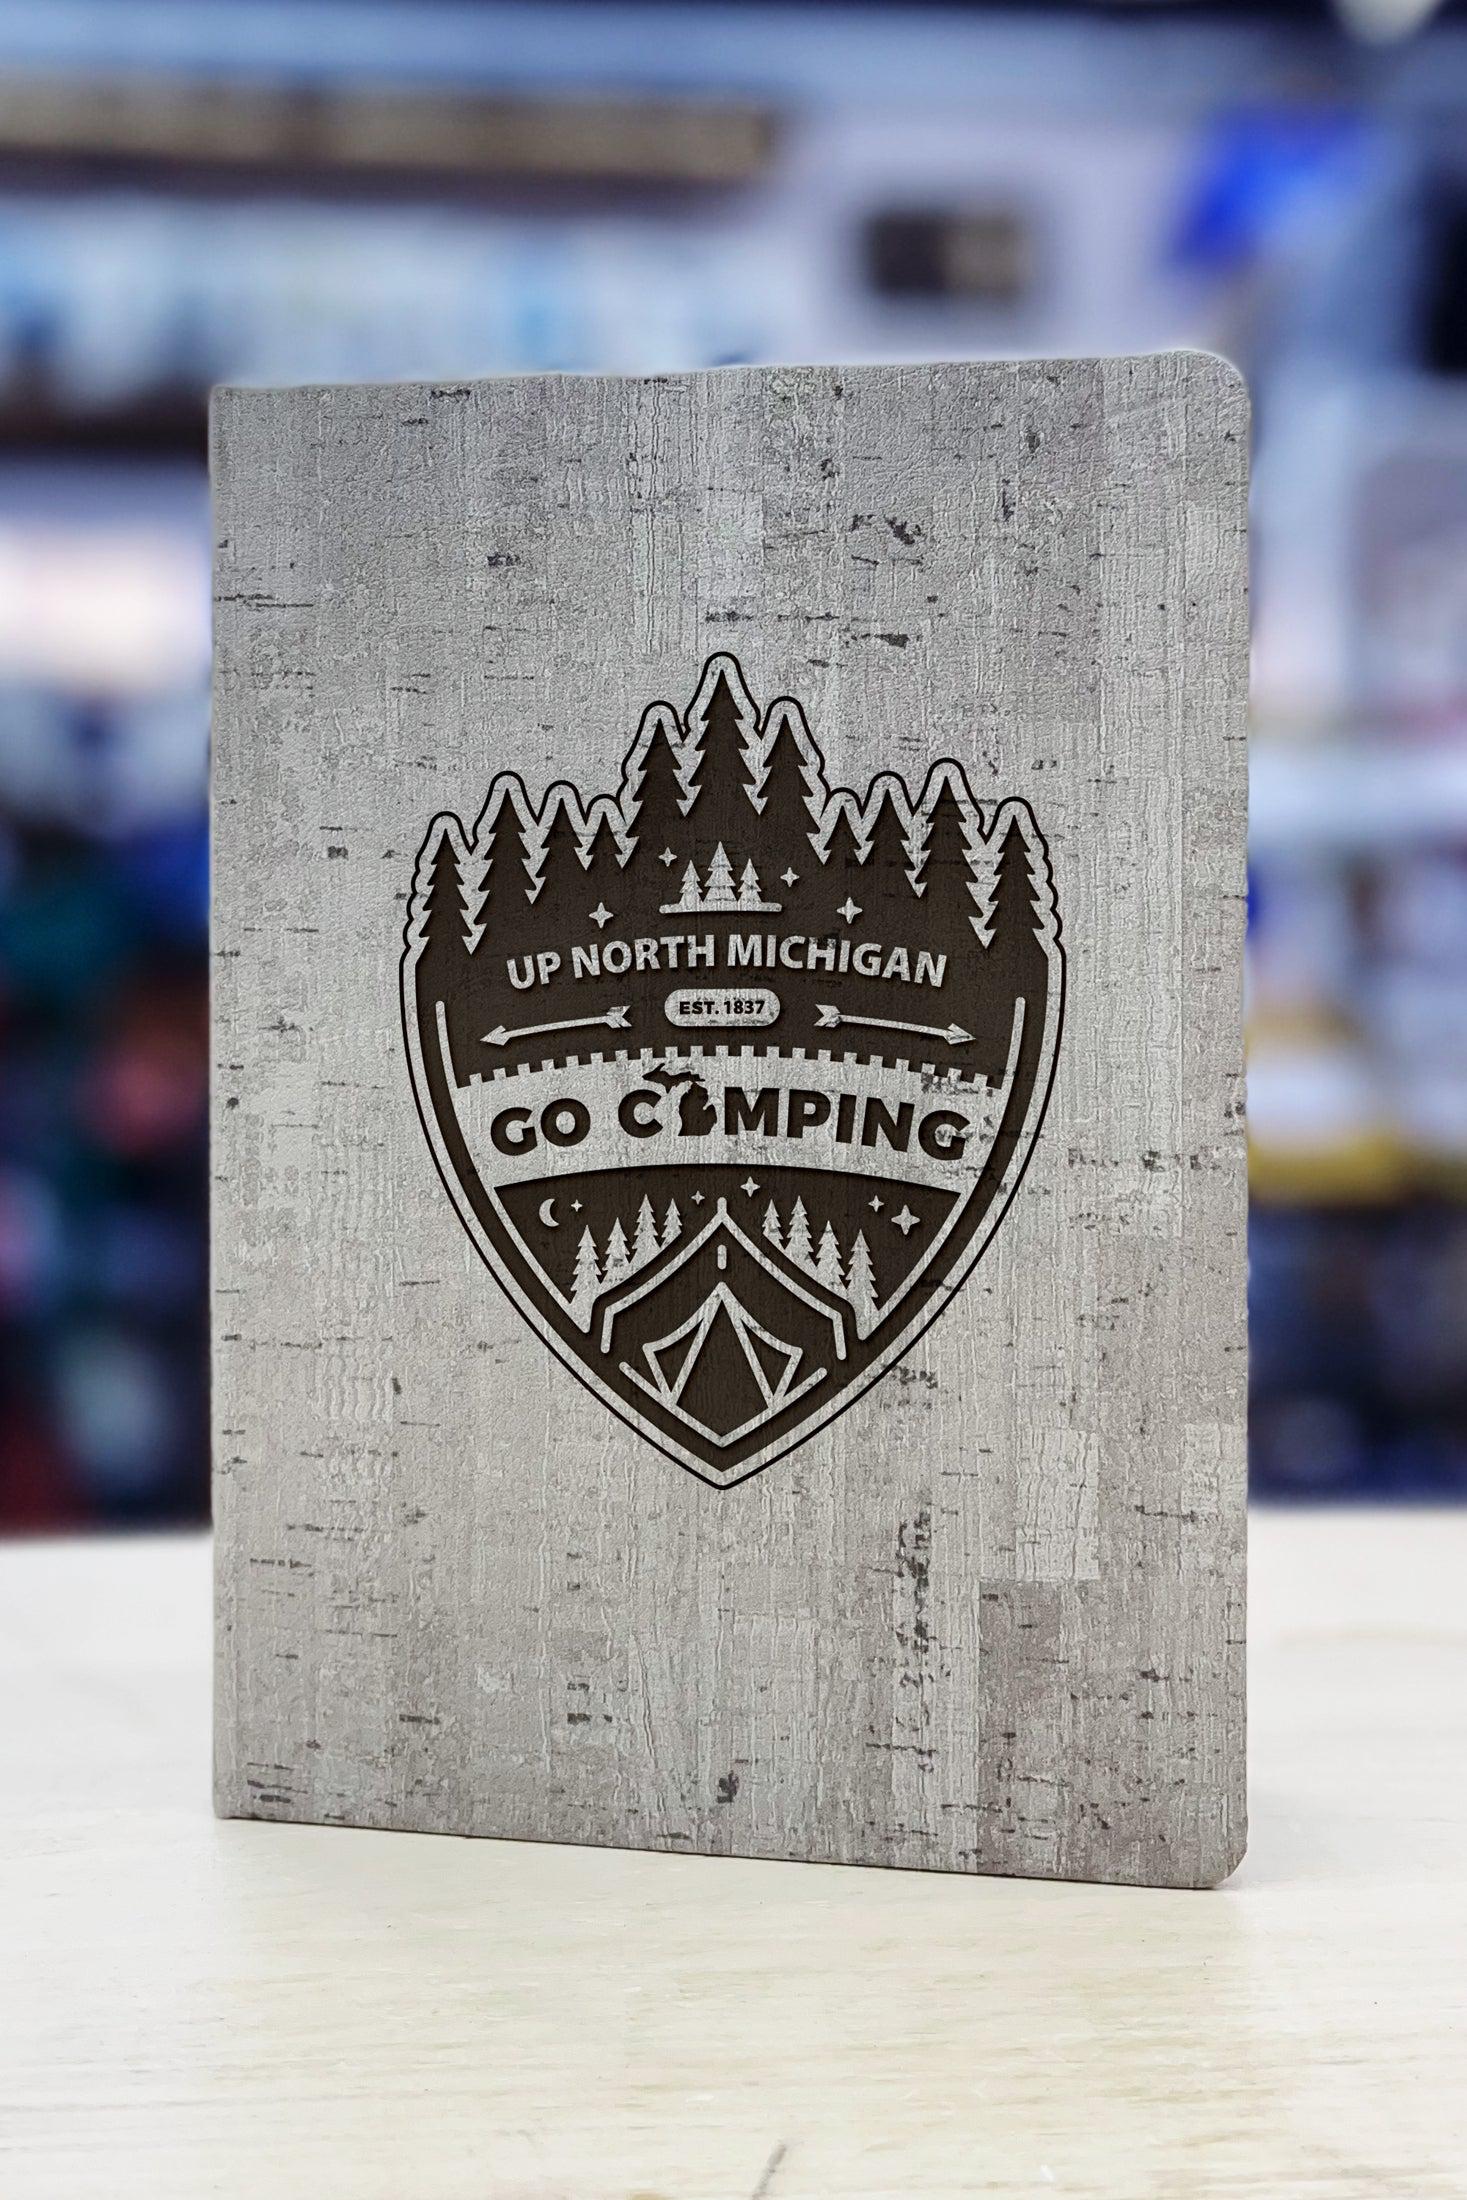 "Go Camping Up North Michigan" - Badge - Leather Journal